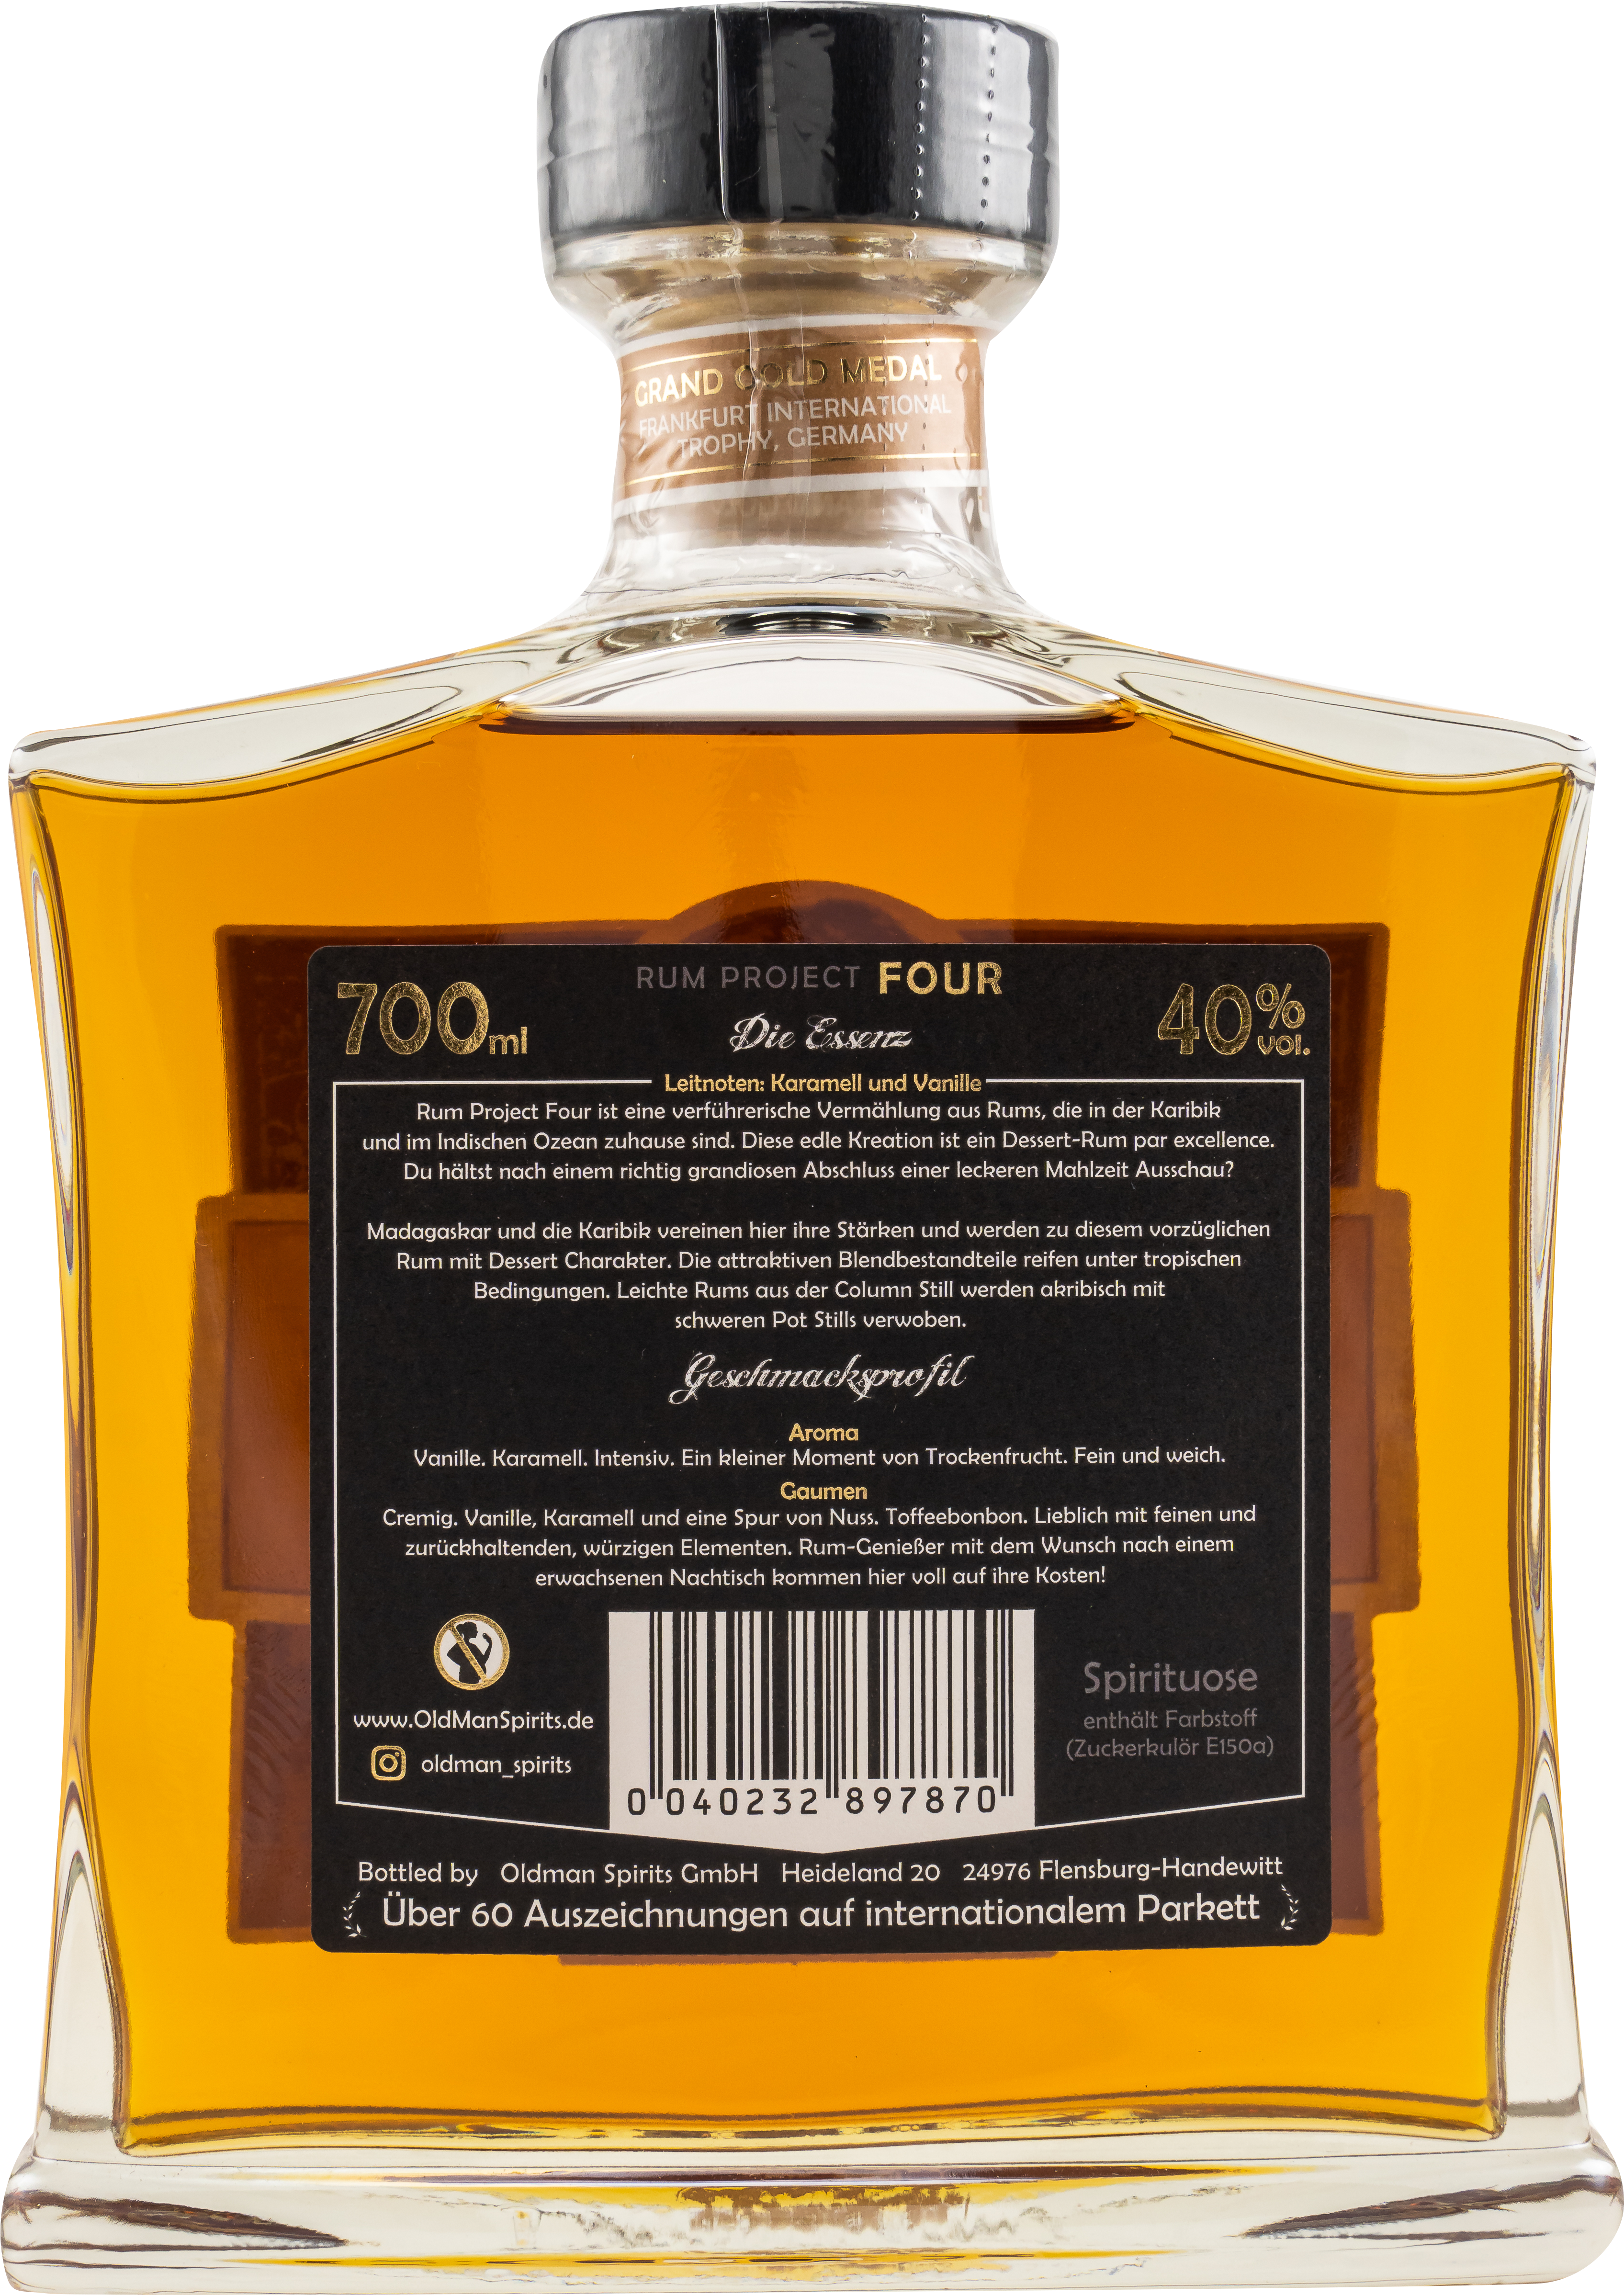 "Rum Project Four" (Vanilla Cane) by Spirits of Old Man 40% 0,7l